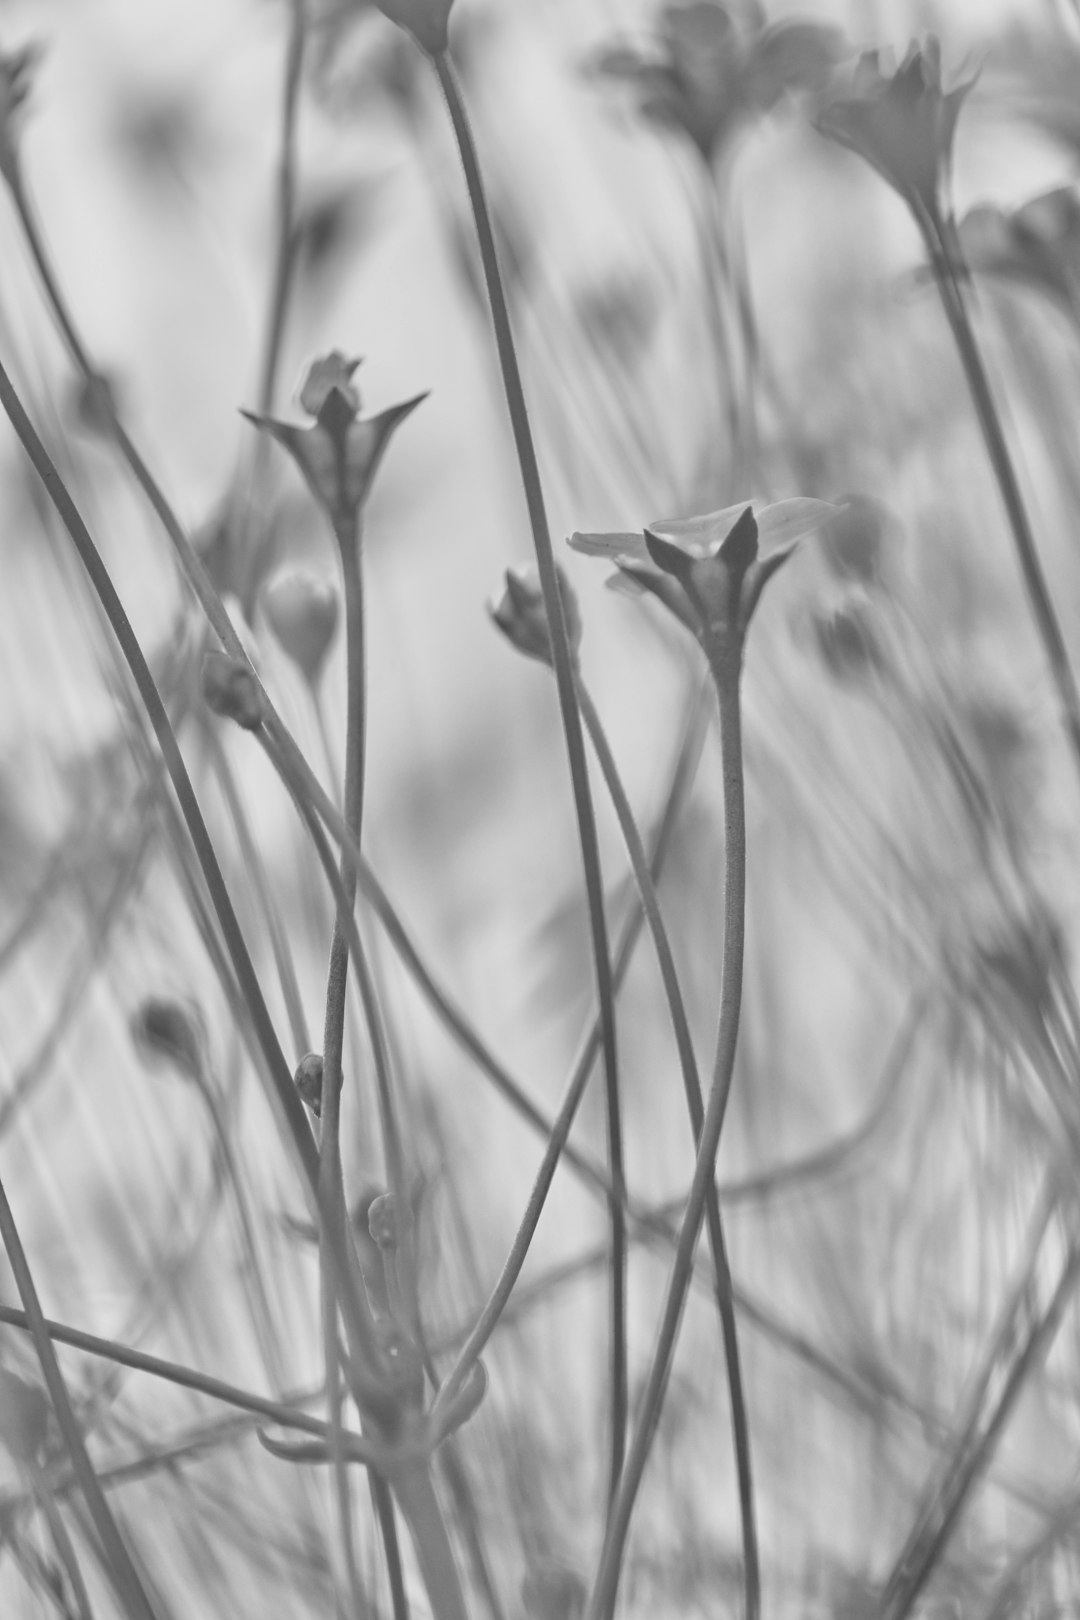 grayscale photo of flower bud